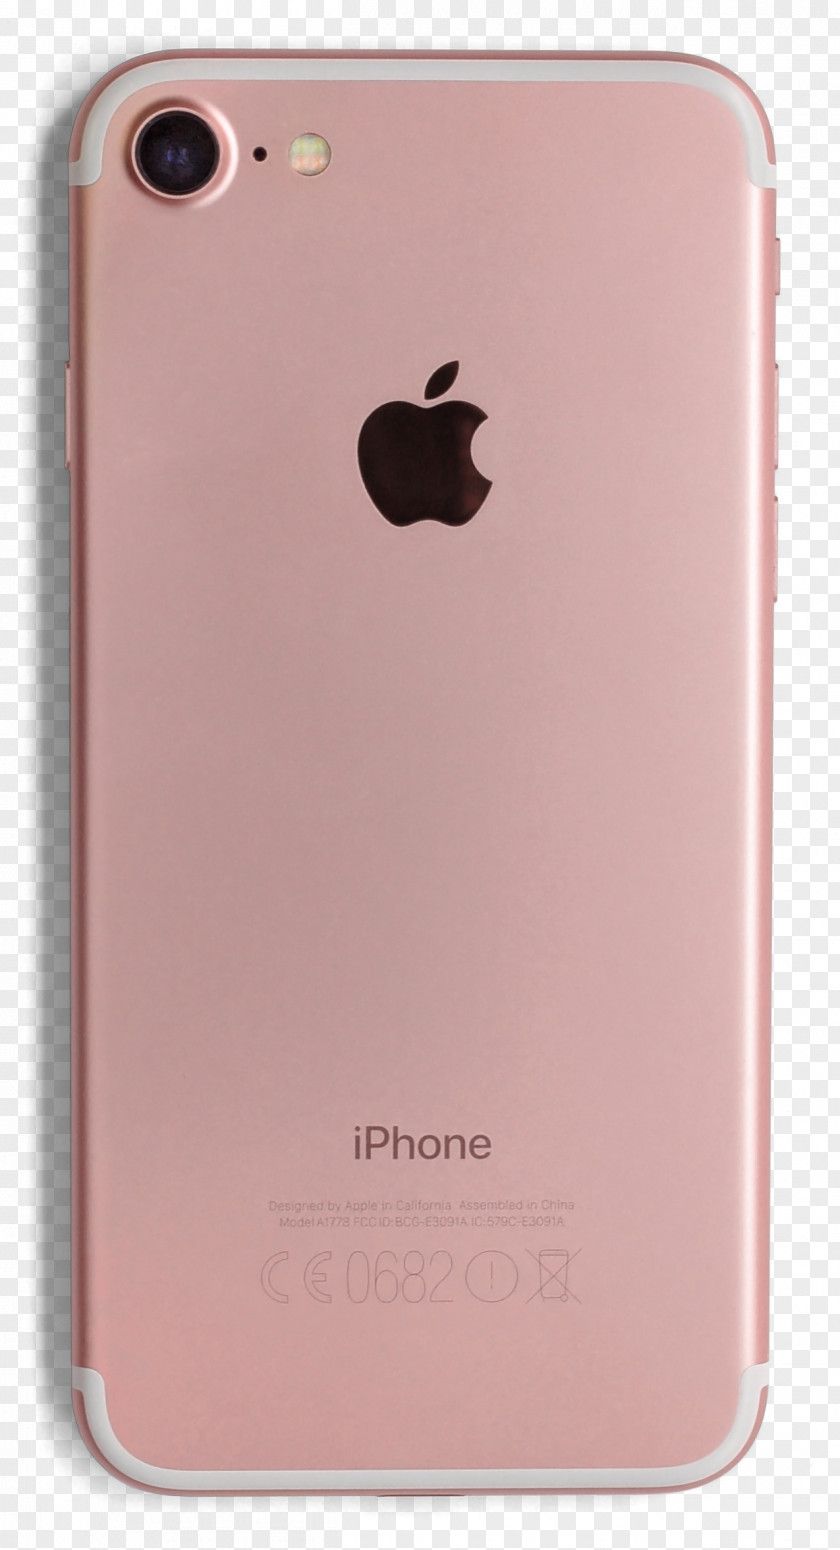 Iphone IPhone 5c 5s Telephone Apple PNG